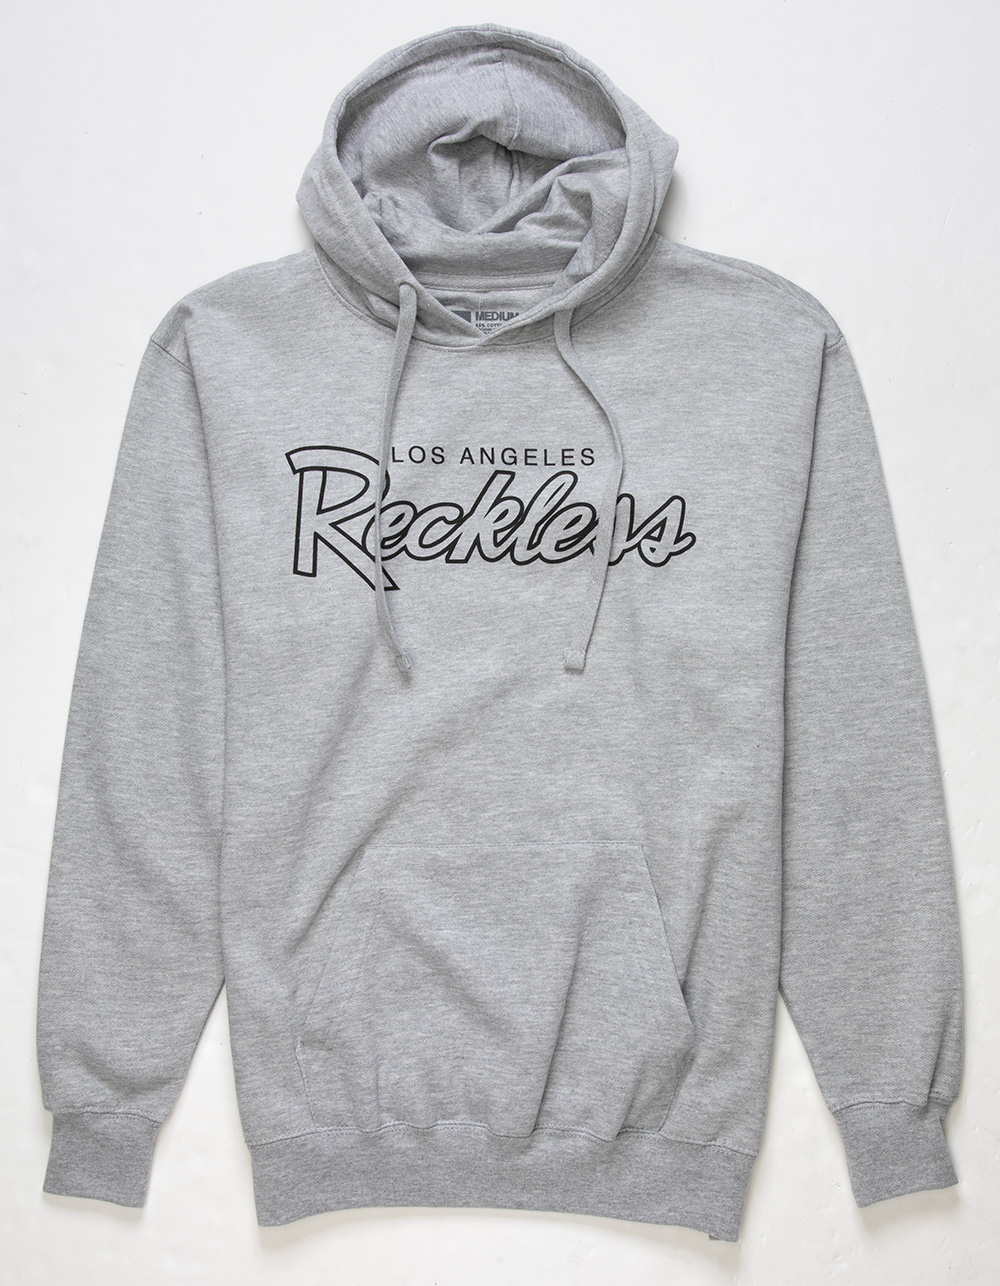 YOUNG & RECKLESS OG Reckless Mens Hoodie - HEATHER GRAY | Tillys